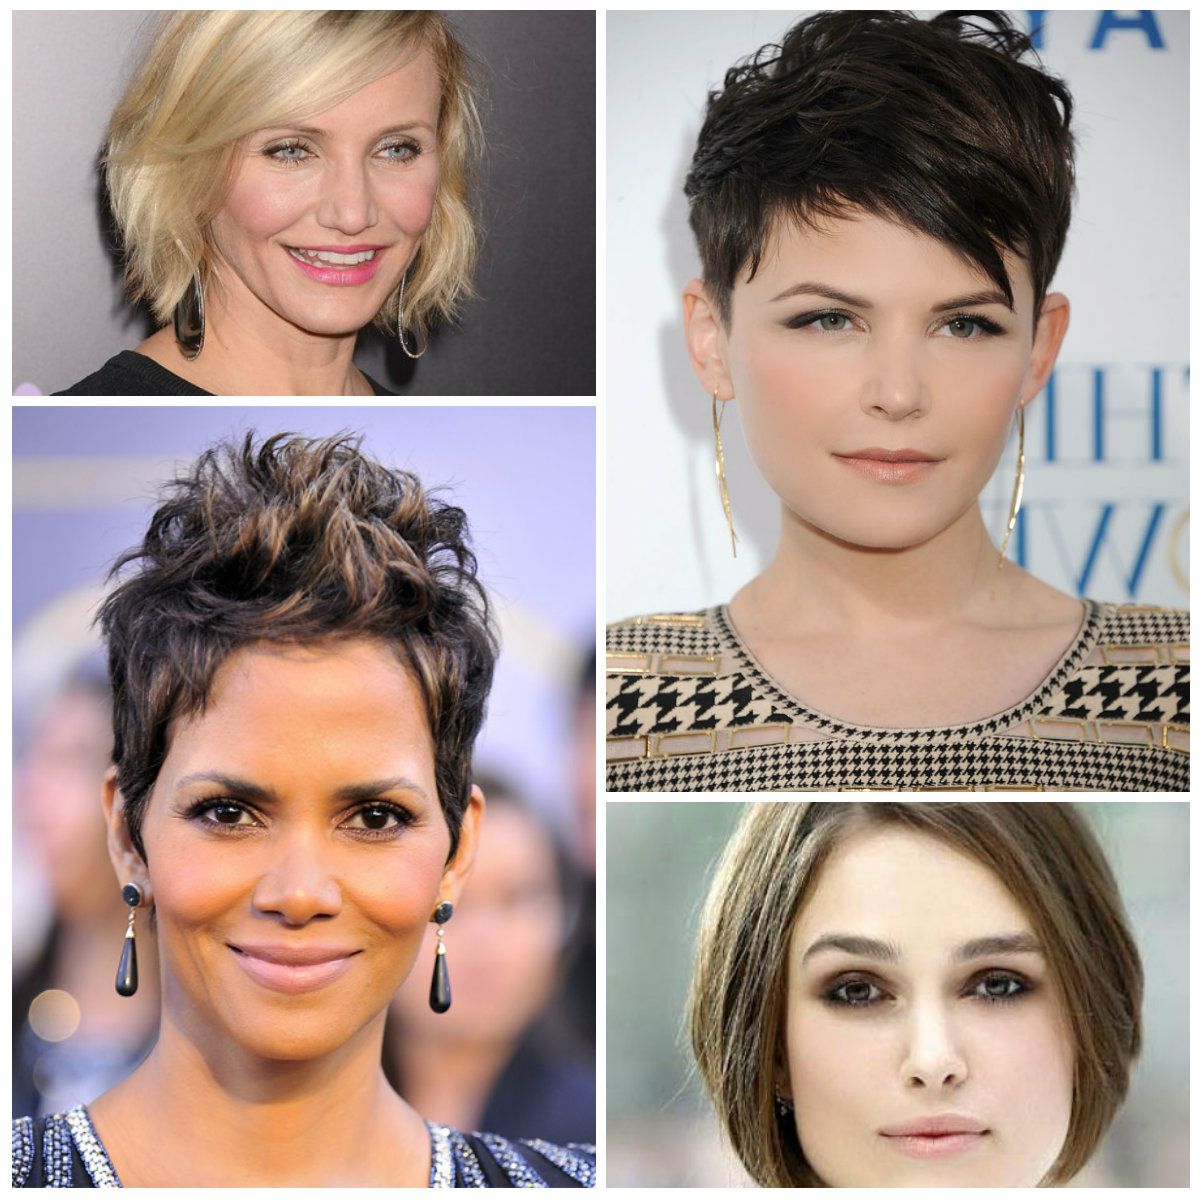 Find Out Full Gallery Of Unique Short Hair For Oval Face 2017 Pertaining To Short Bobs For Oval Faces (View 13 of 25)